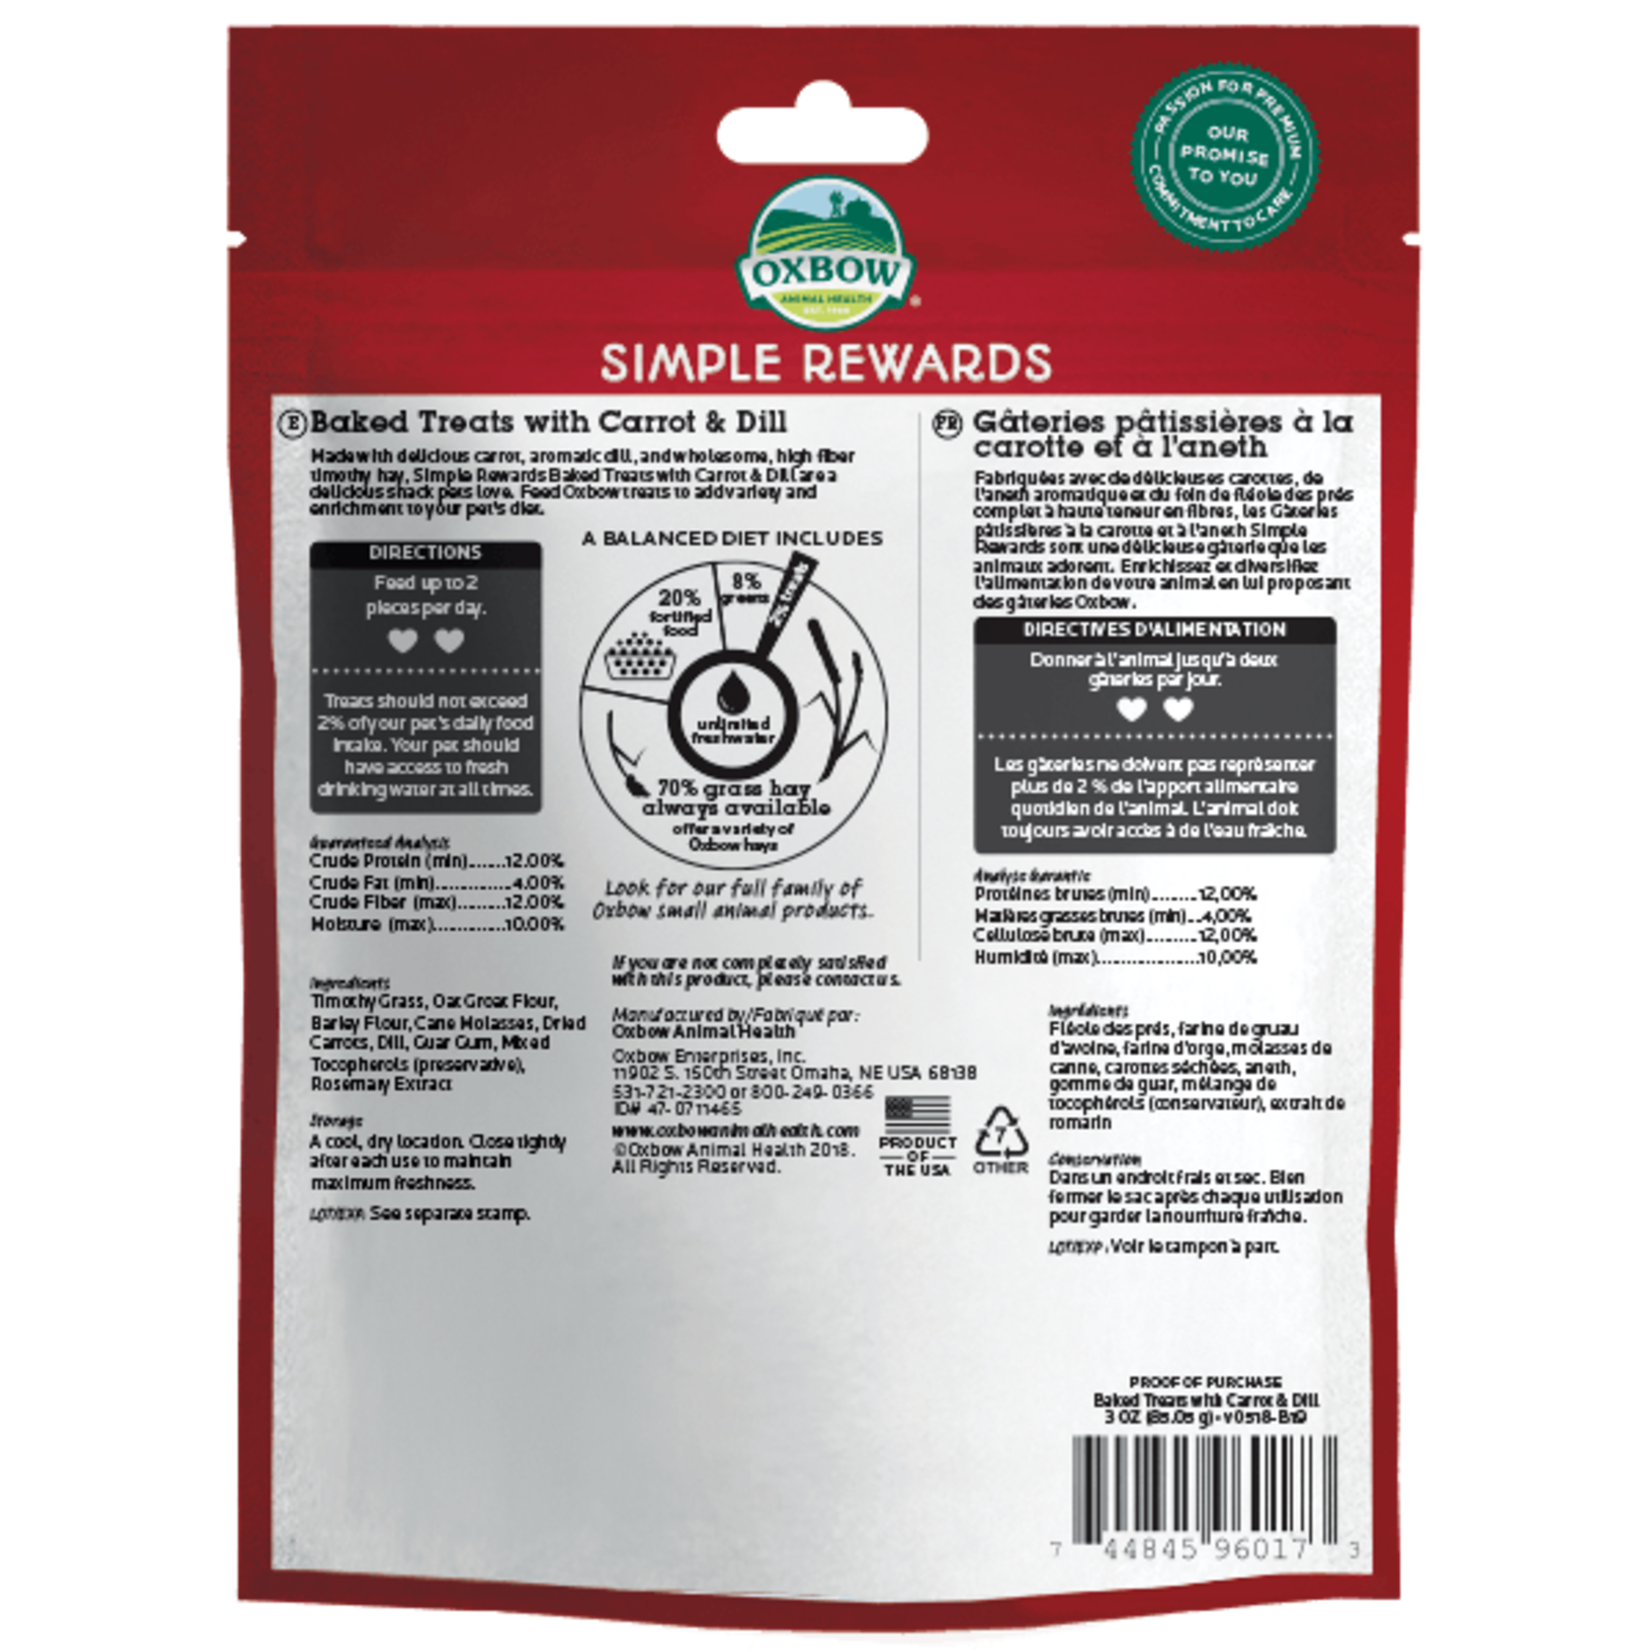 OXBOW Oxbow Simple Rewards Baked Treats with Carrot & Dill 3oz